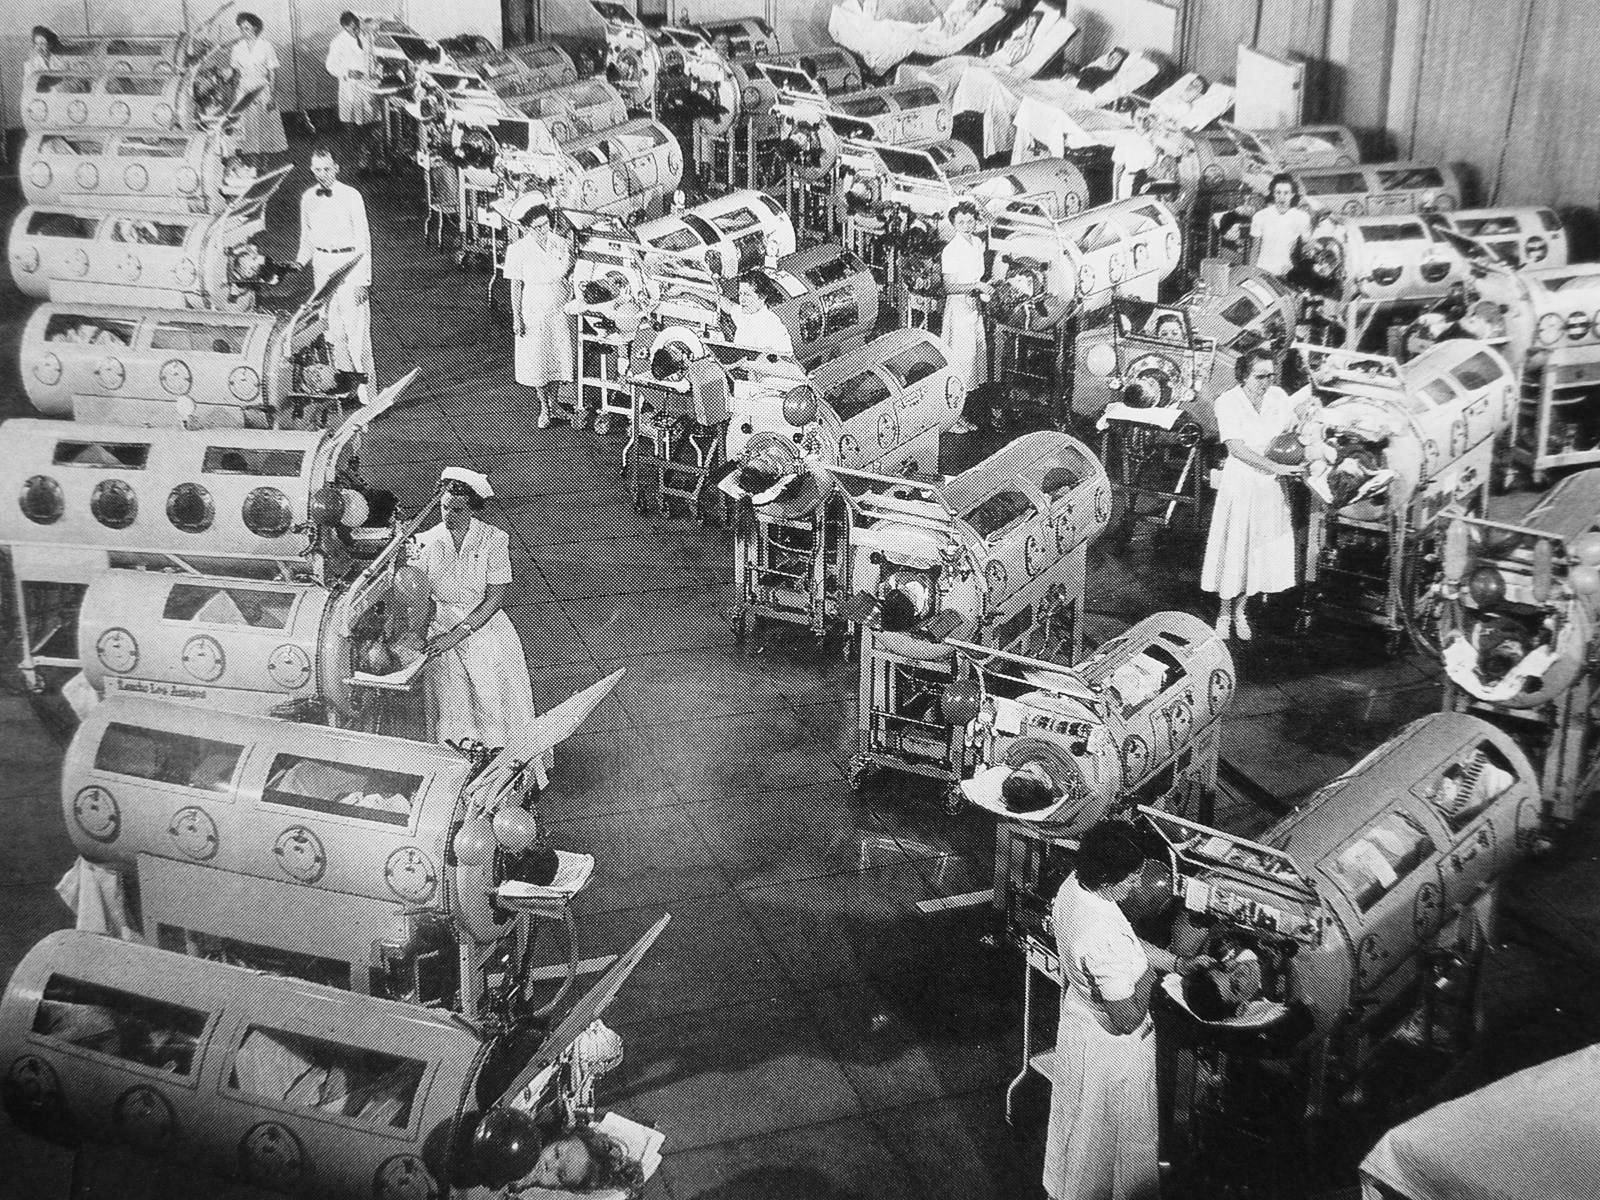 A photograph of a hospital room in the US with patients in iron lungs in 1952.